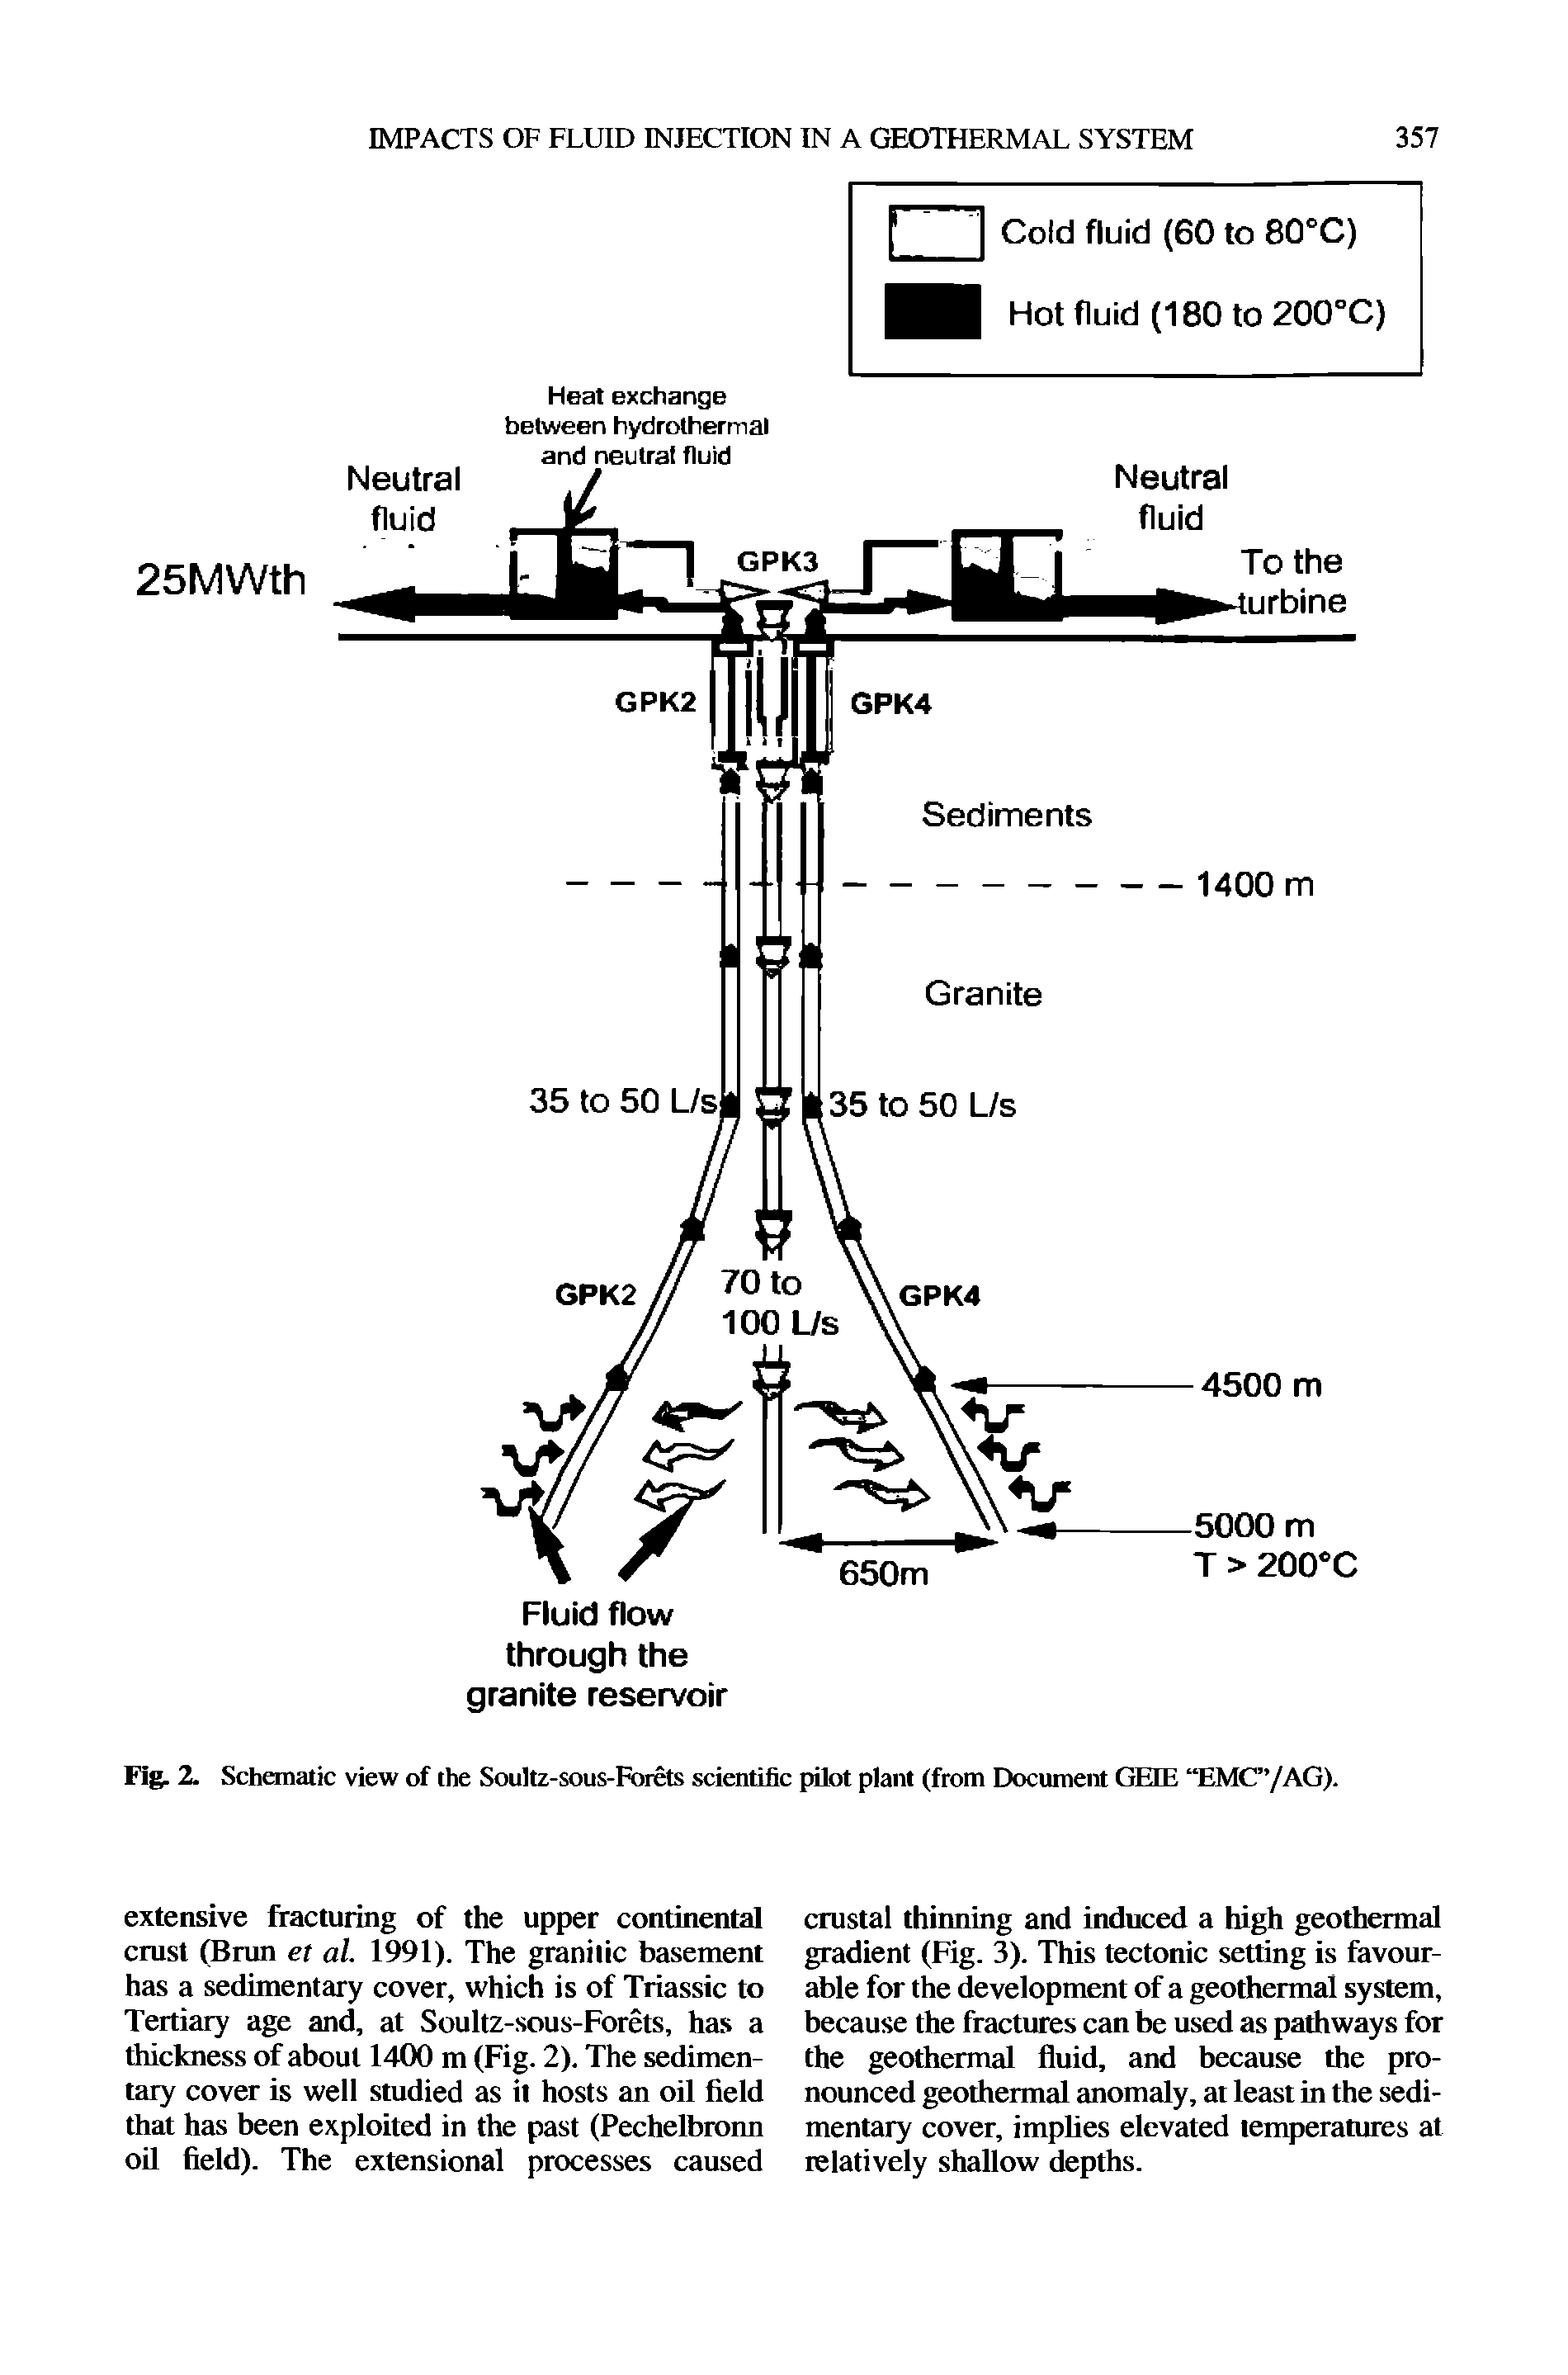 Fig. 2. Schematic view of the Soultz-sous-Forets scientific pilot plant (from Document GEIF. EMC /AG).